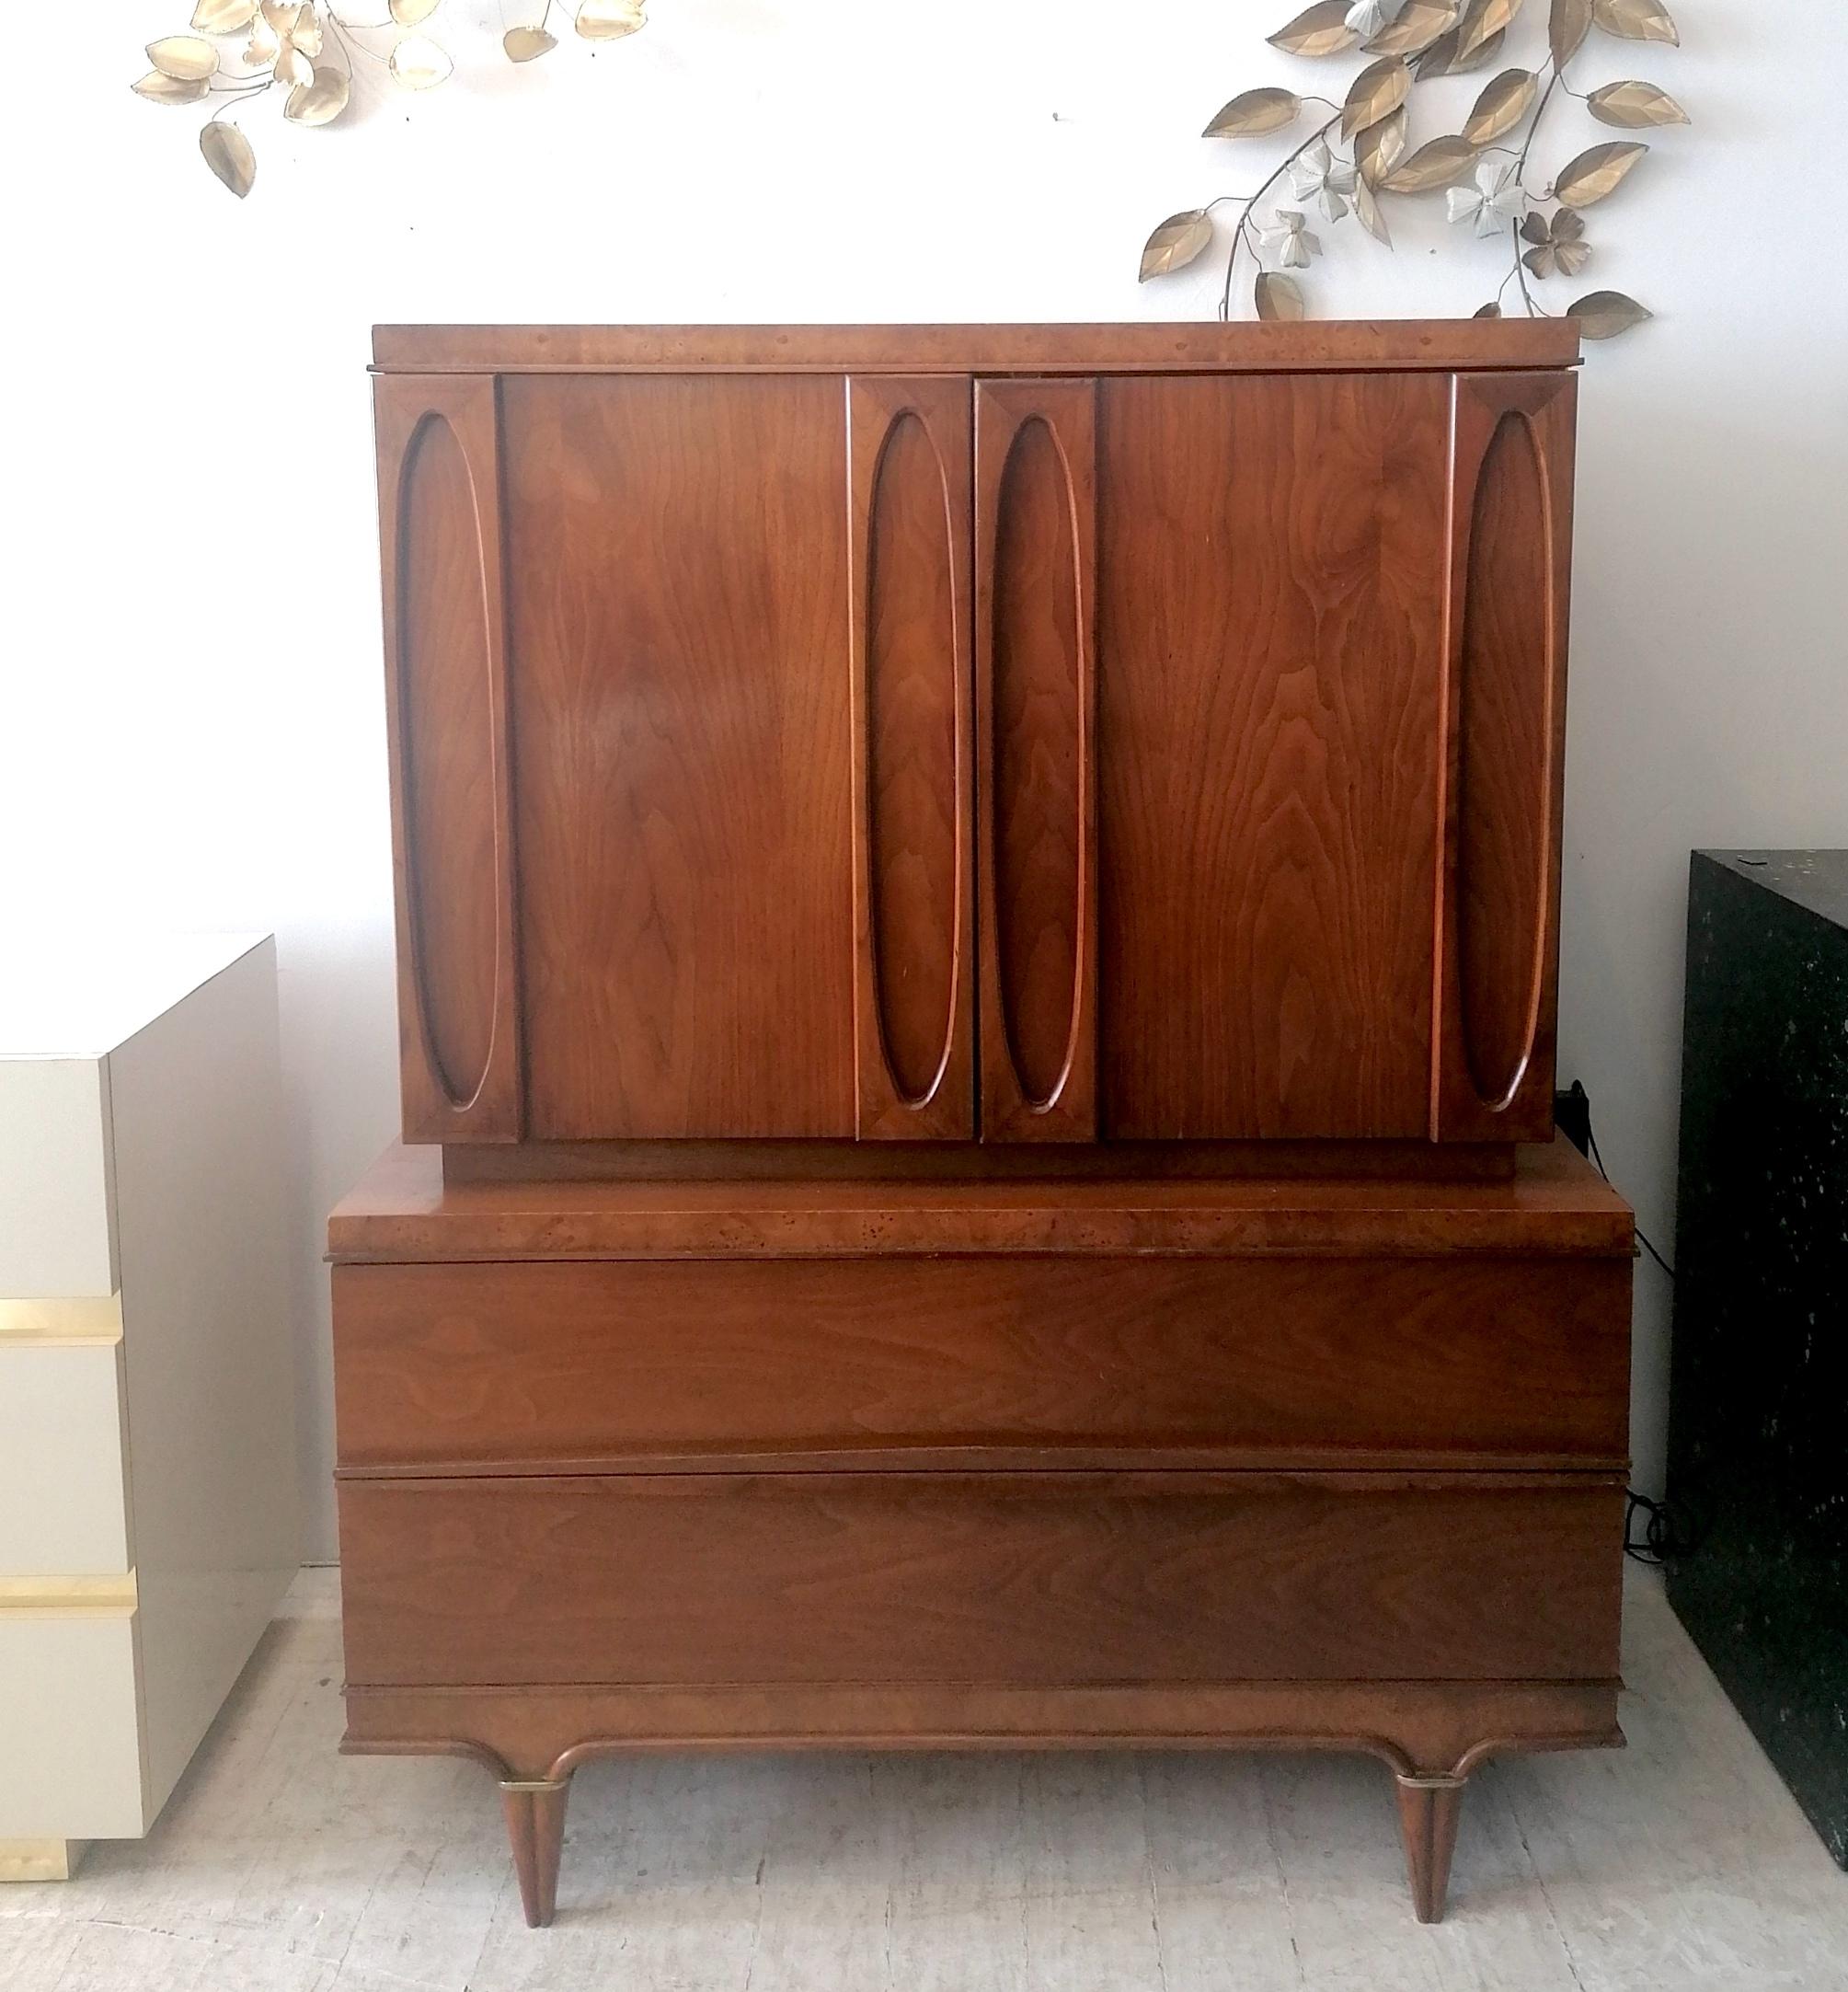 Tall midcentury cabinet by 'American of Martinsville' USA 1960s. Walnut and burr elm, with gilt metal trim on legs
A few little bits of wear (there's a small chip on back edge trim, see last pic) but looks great overall.

Dimensions: width at base